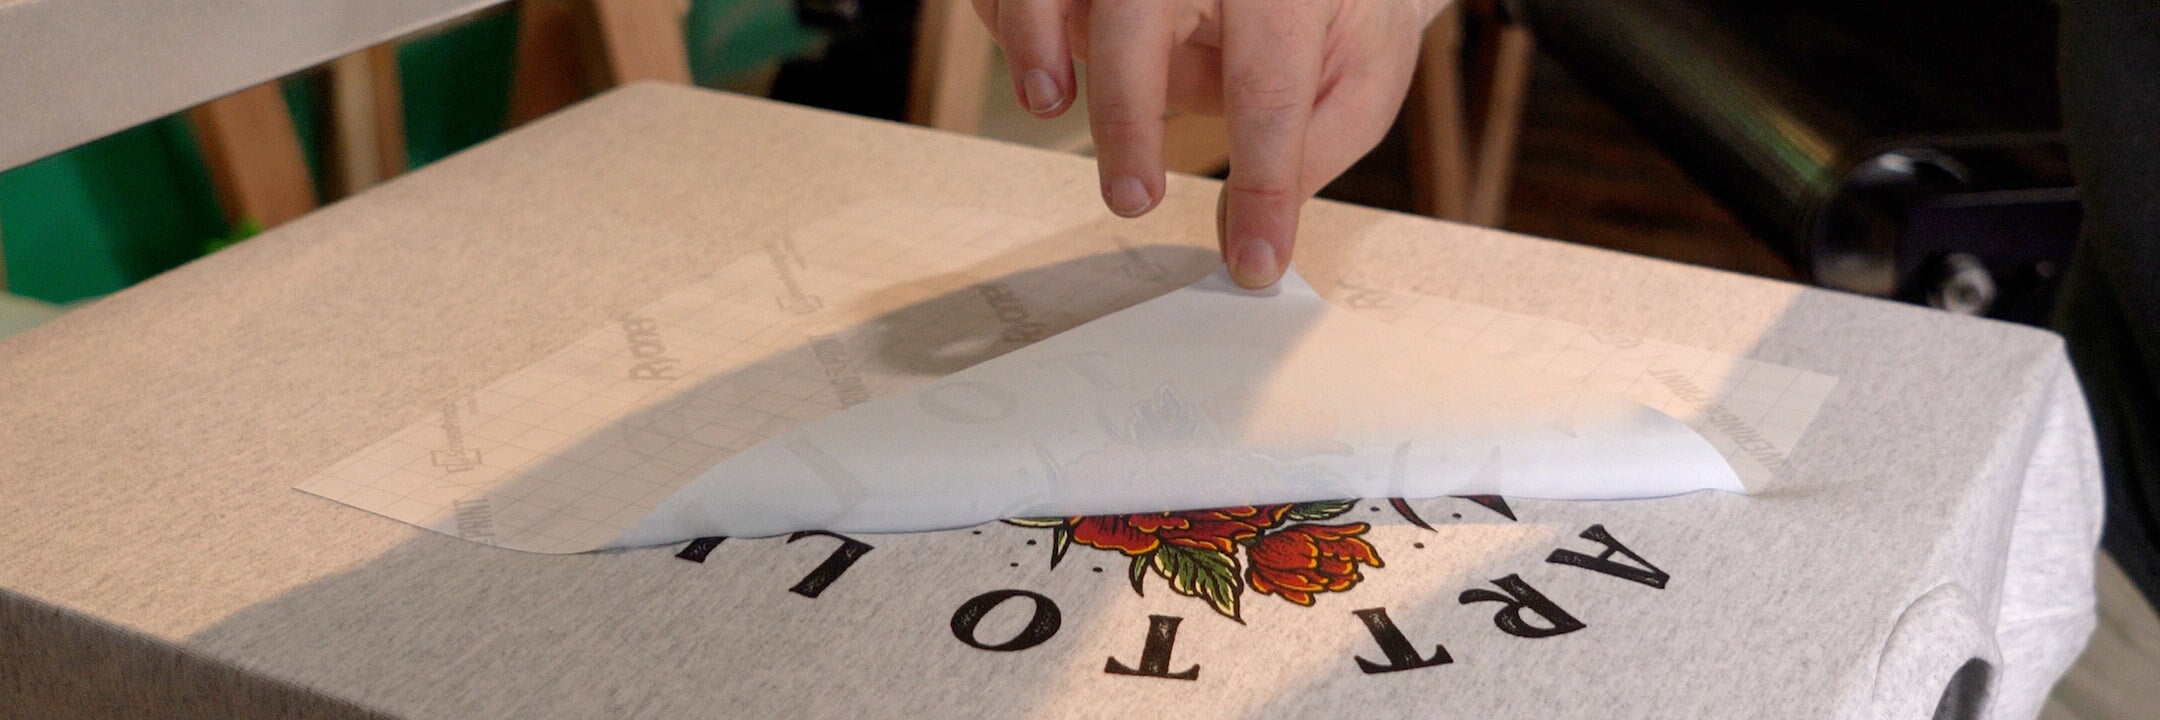 How to Use Plastisol Heat Transfers to Print T-Shirts – T-Shirt